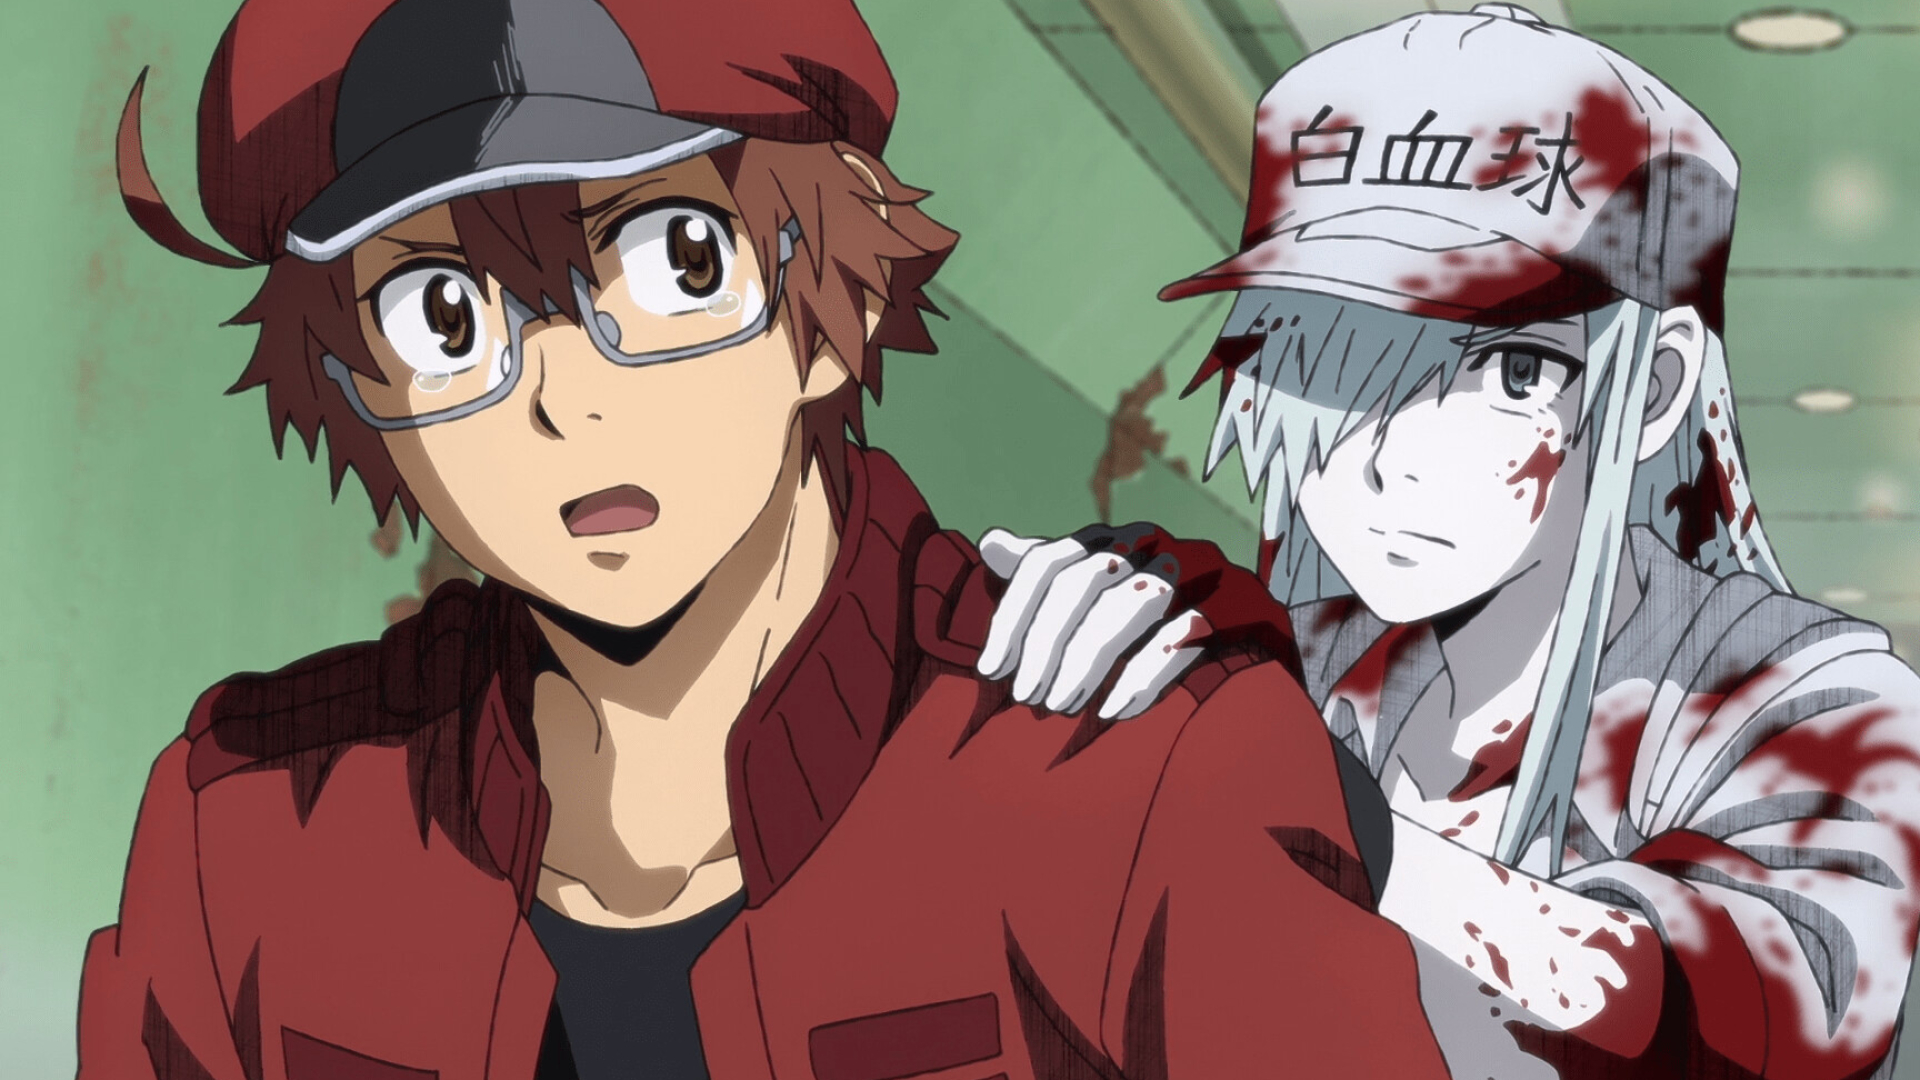 Cells at Work! Code Black: Comedy anime that follows the adventures of Red Blood Cell. 1920x1080 Full HD Wallpaper.